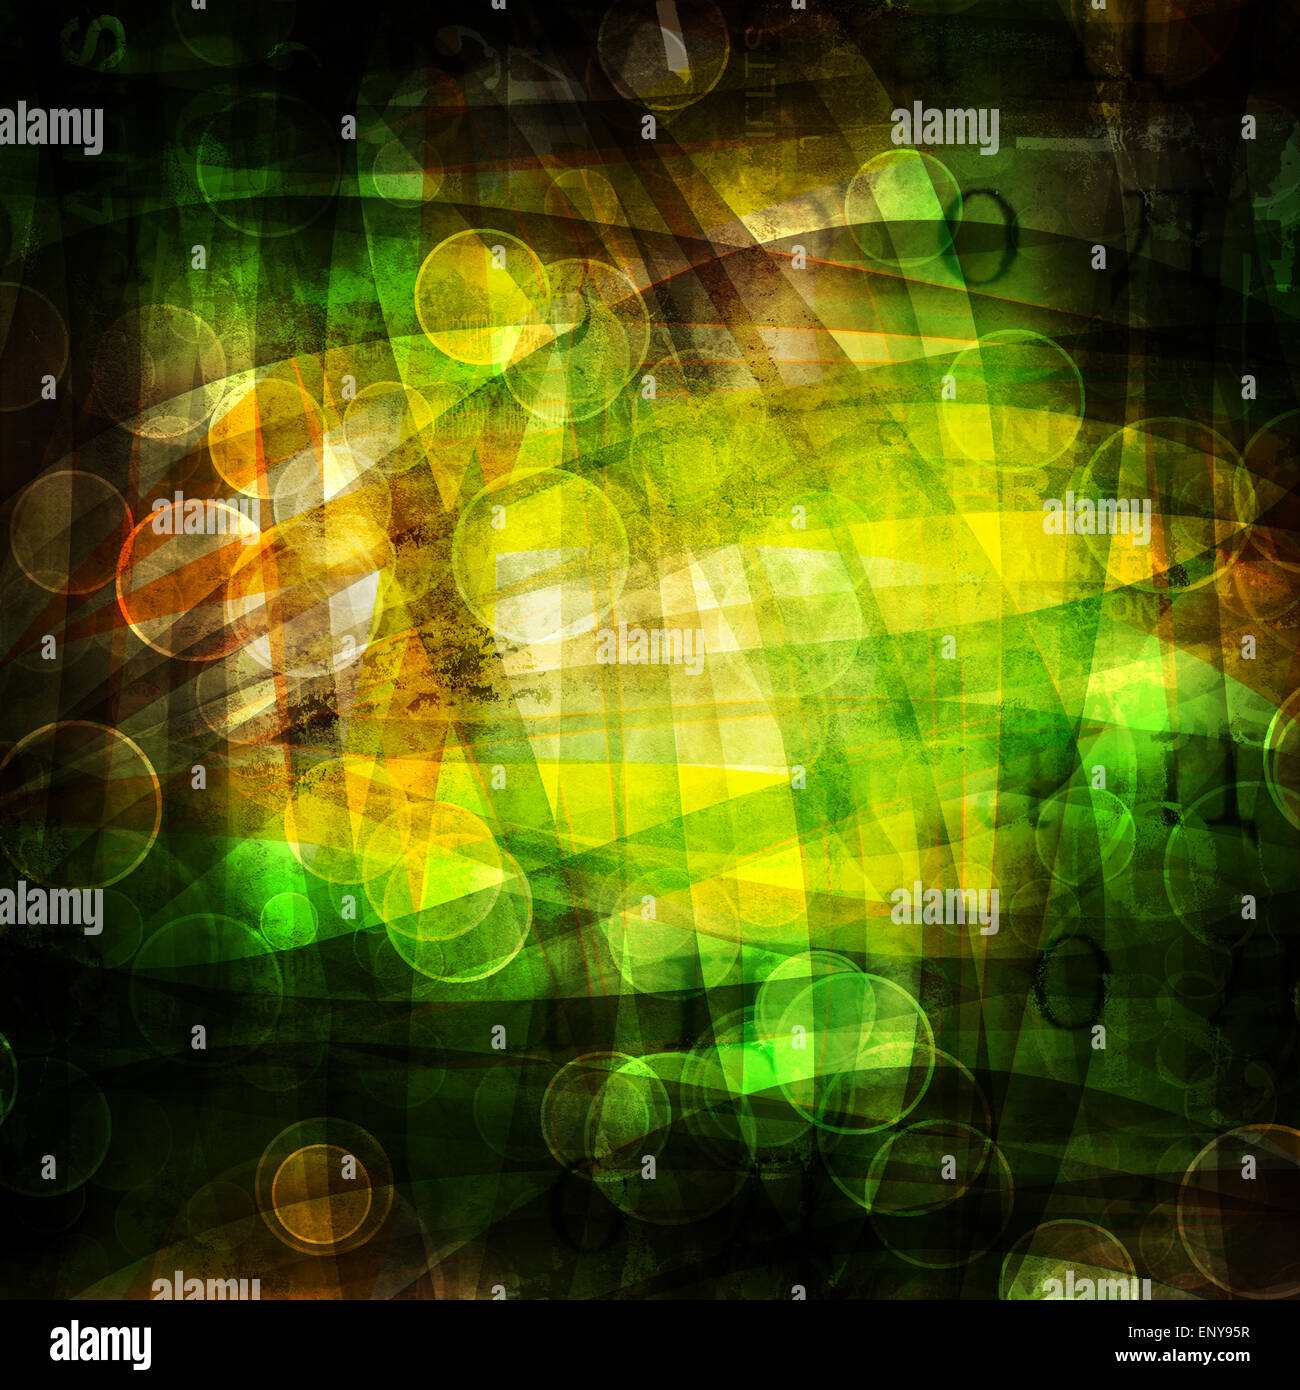 Grunge abstract background with old torn posters Stock Photo